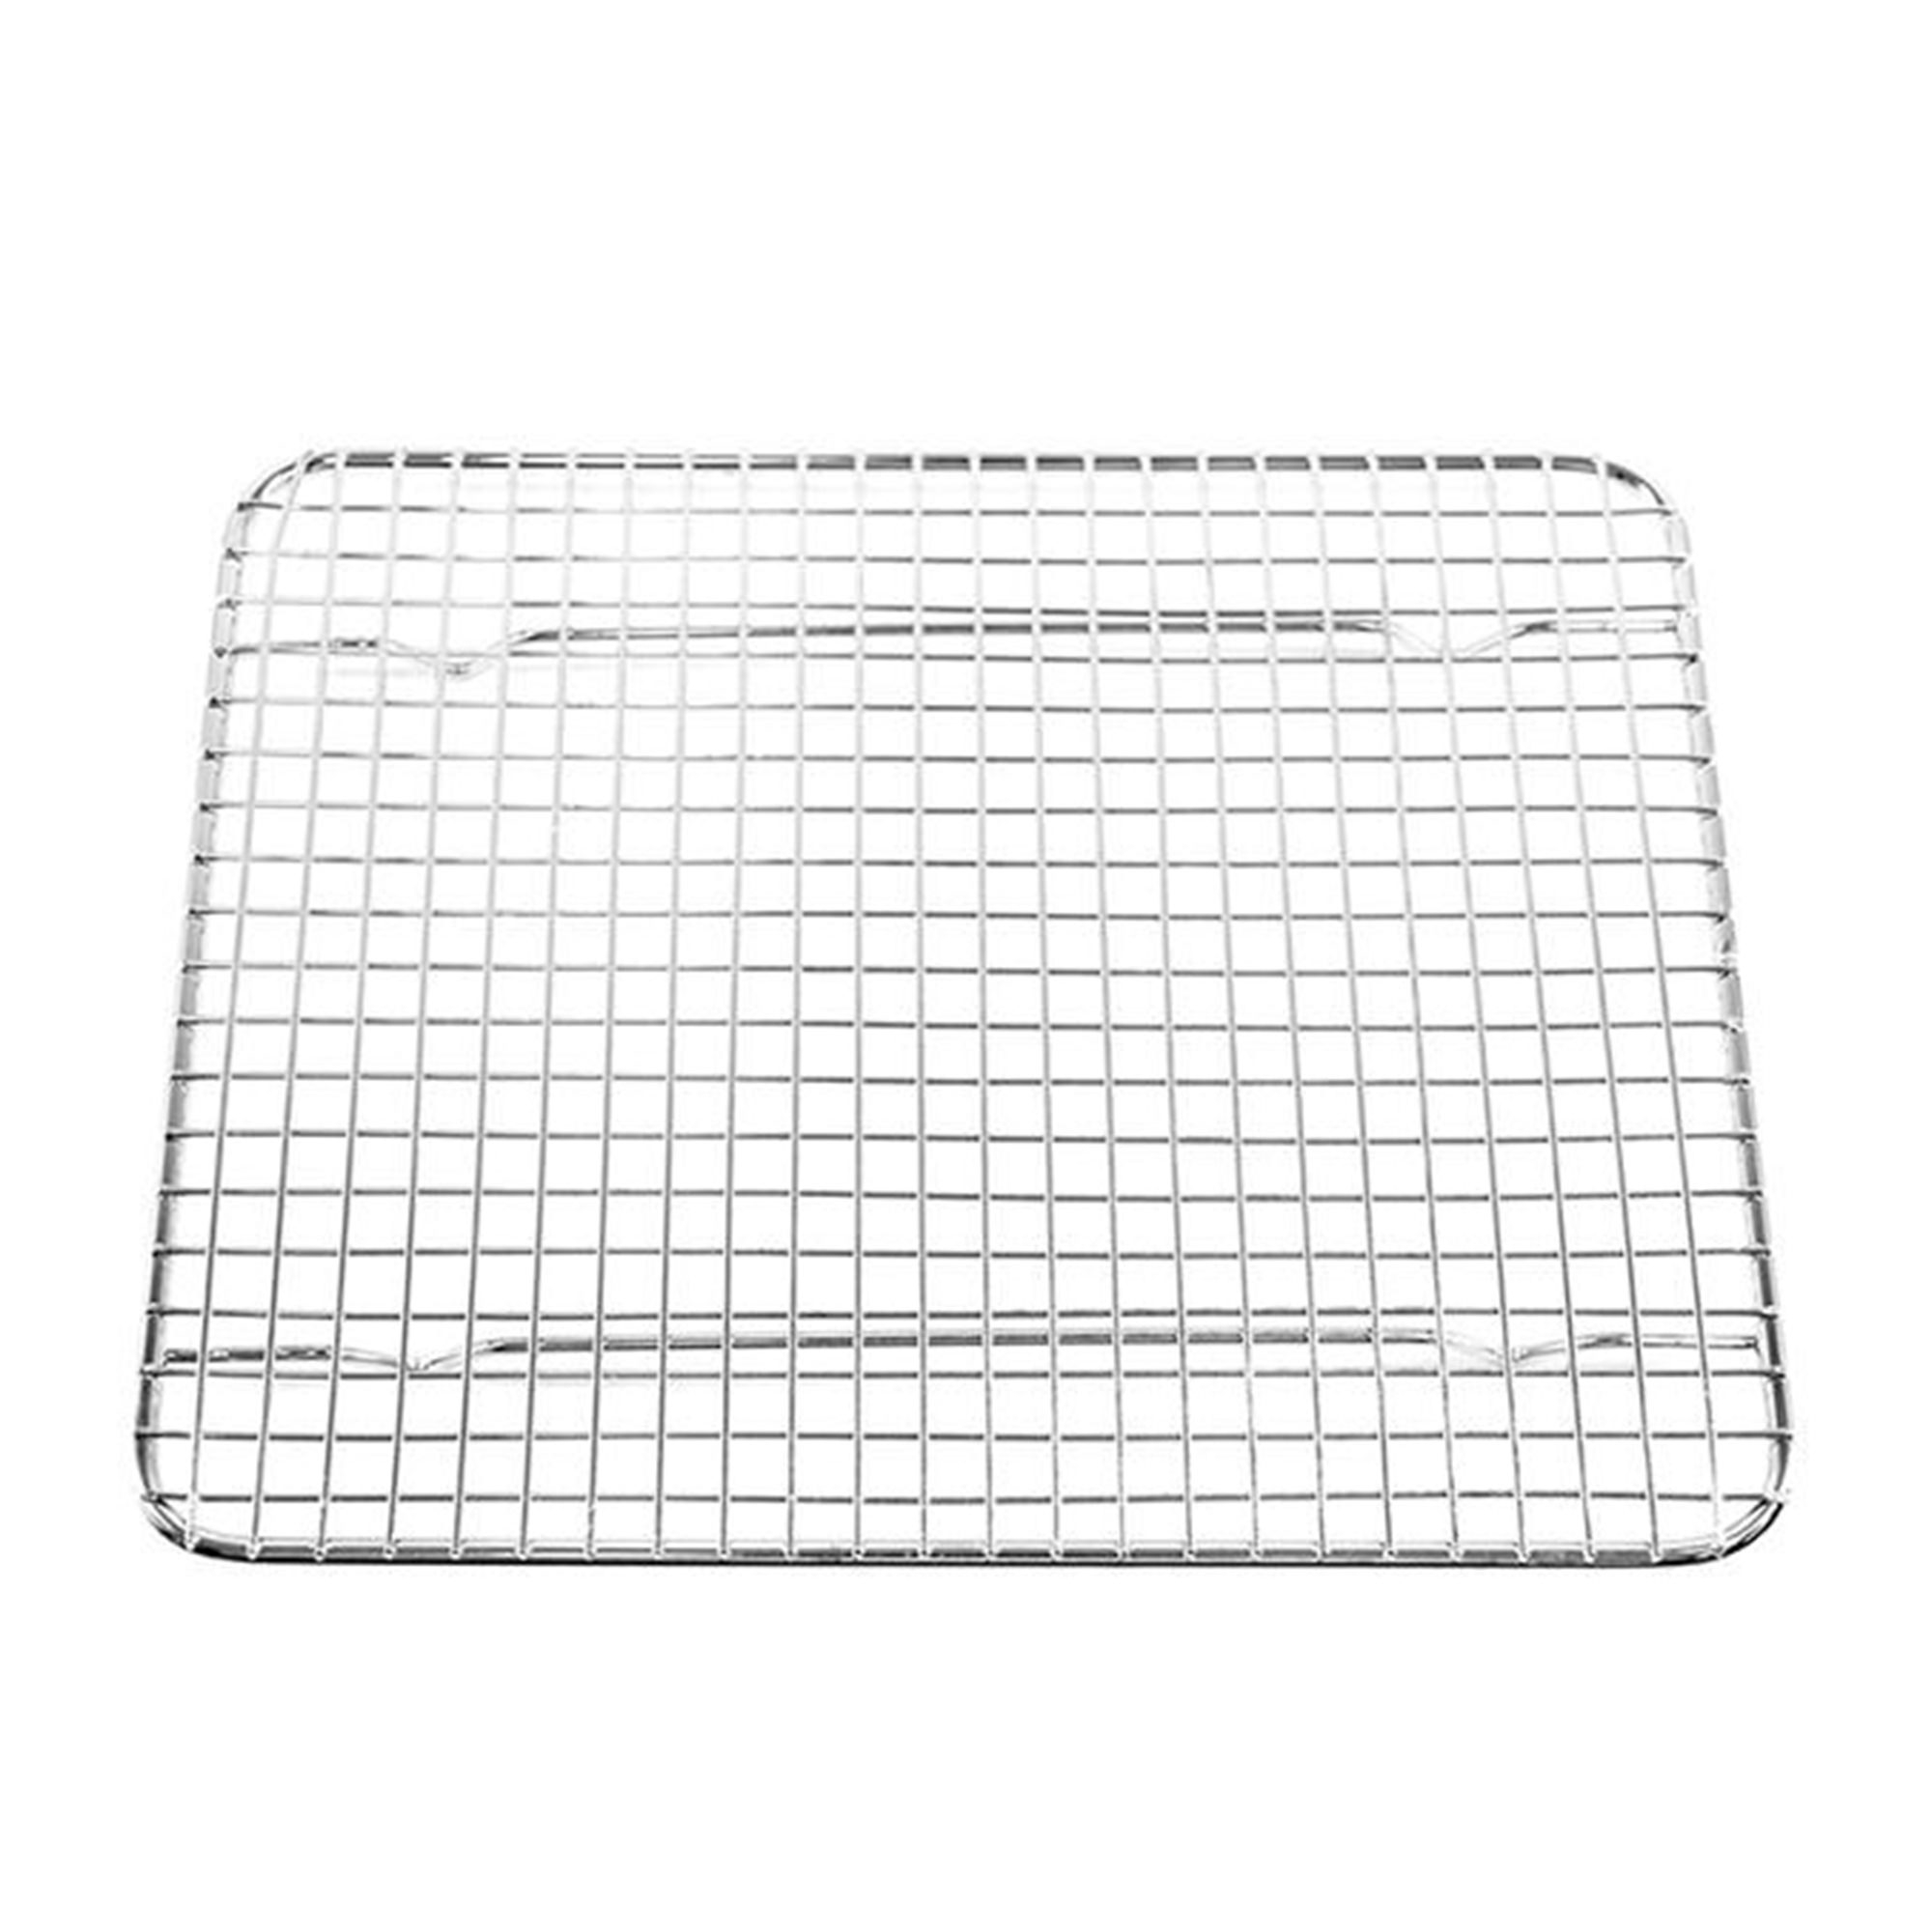 Chef Inox Cake Cooling Rack with Legs 1/2 Size Image 1